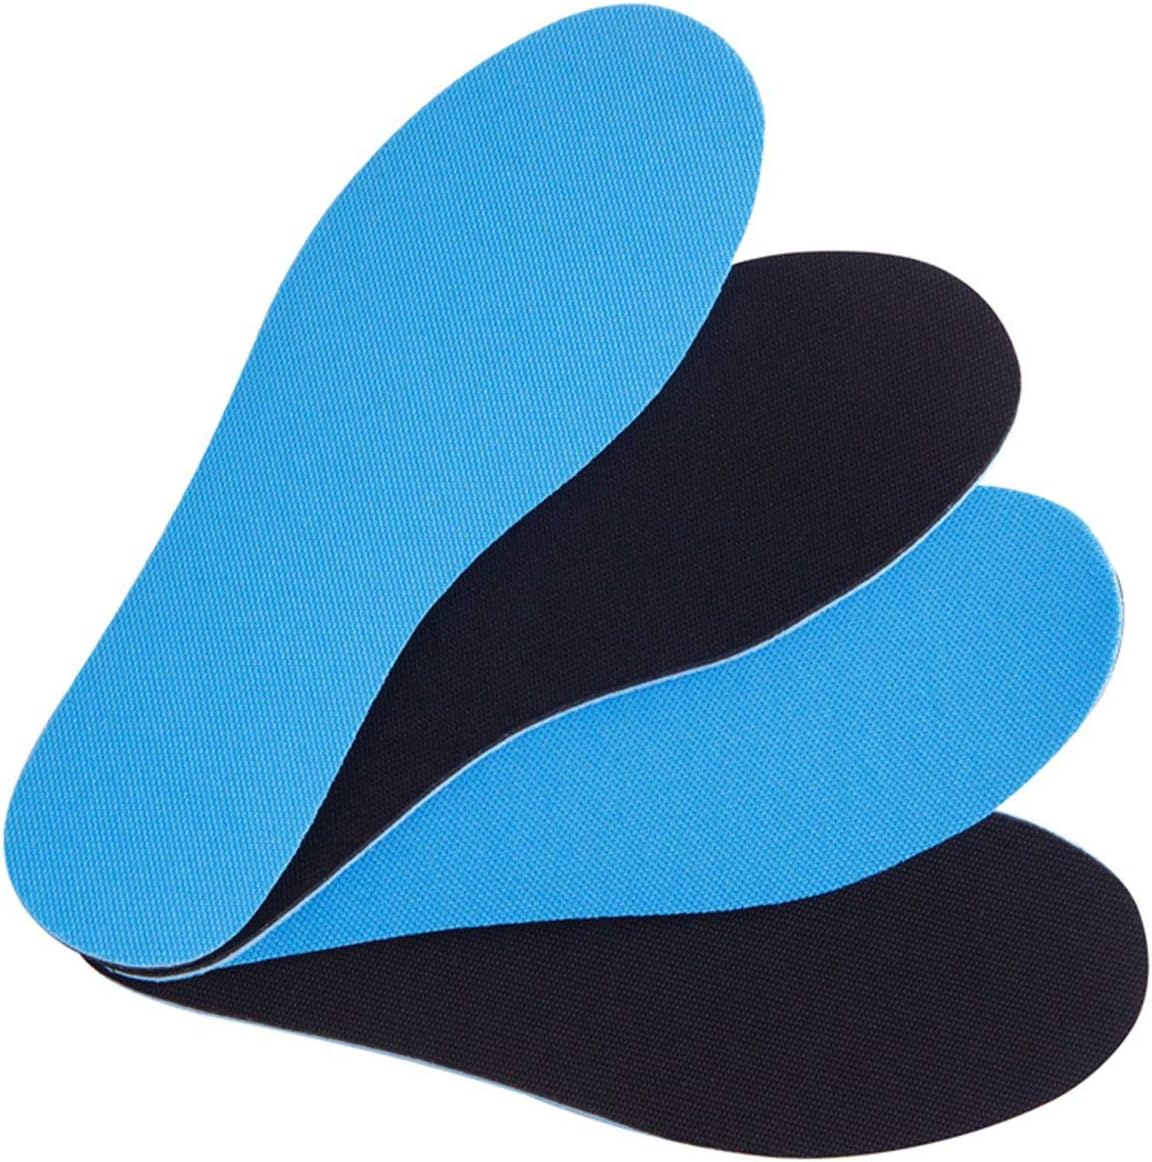 2 Pairs Breathable Insoles, Super-Soft, Sweat-Absorbent, Double-Colored and Double-Layered Shoe Inserts of Foam That Fit in Any Shoes (Blue/Black, 9.5-12 Women/8-9 Men)